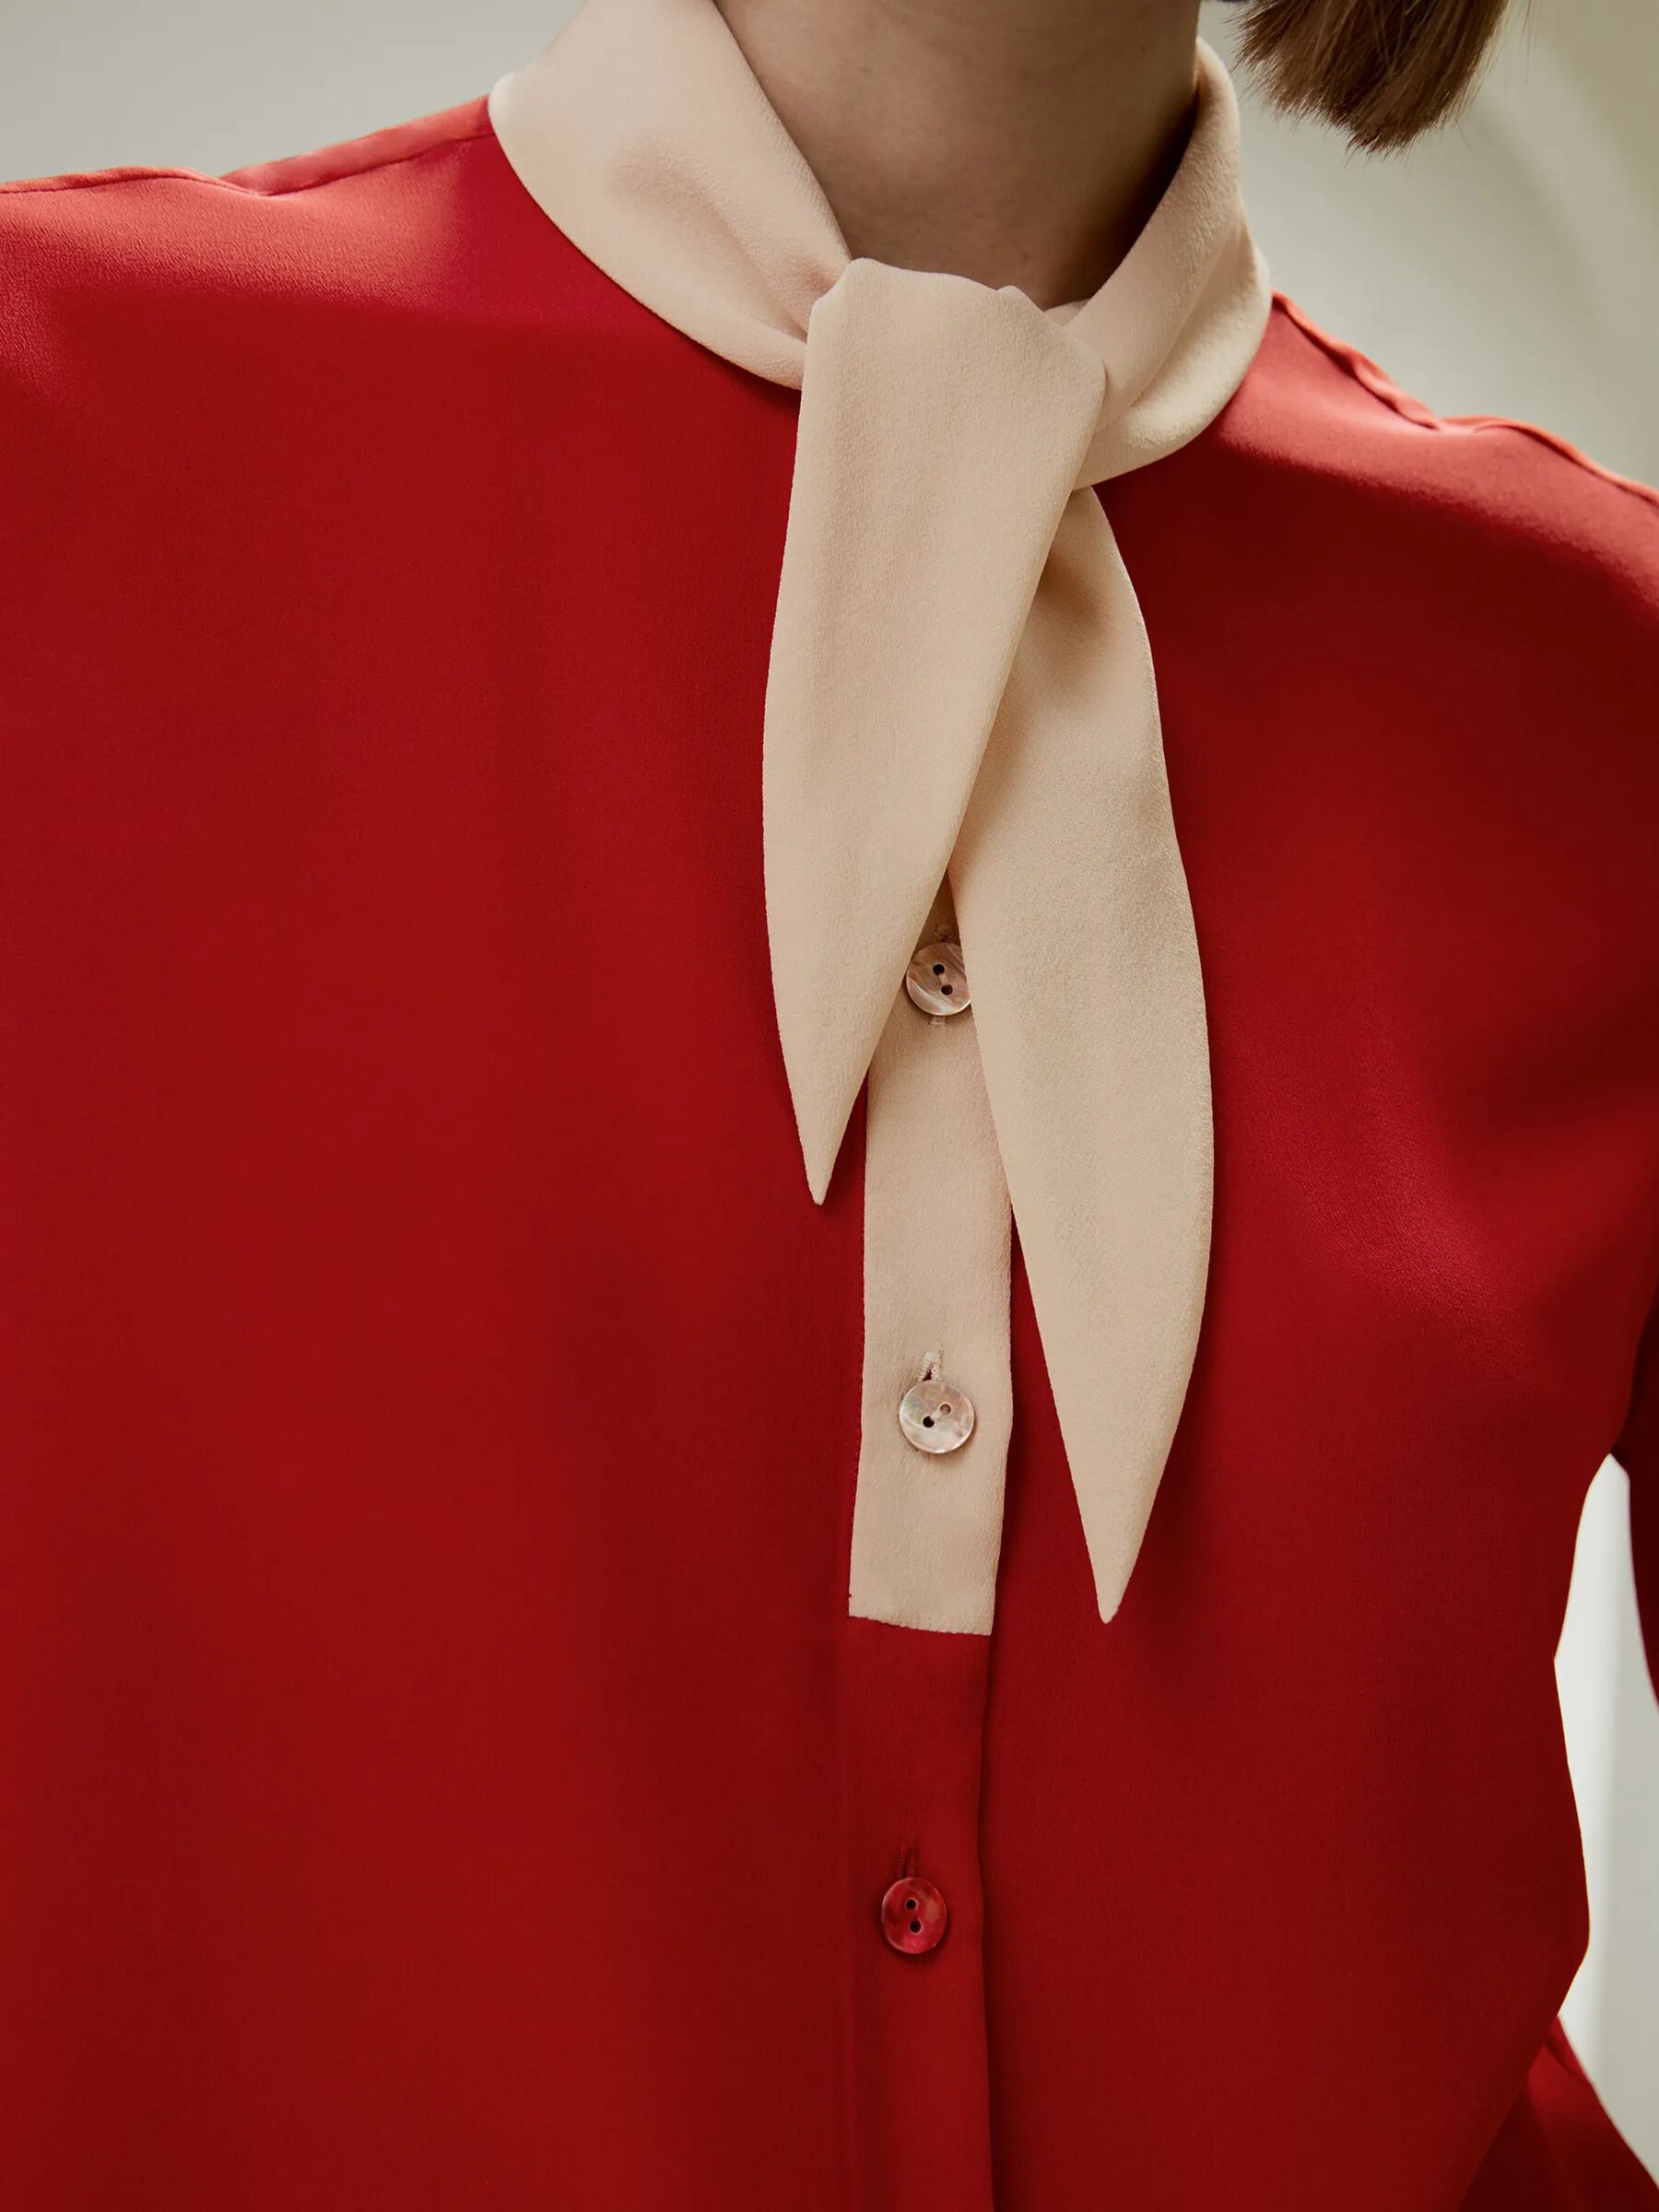 LILYSILK Business Red Blouse With A Beige Collar And Buttons   Silk   Ladies Blouses Pure Fashion-Forward Oversized Top 4